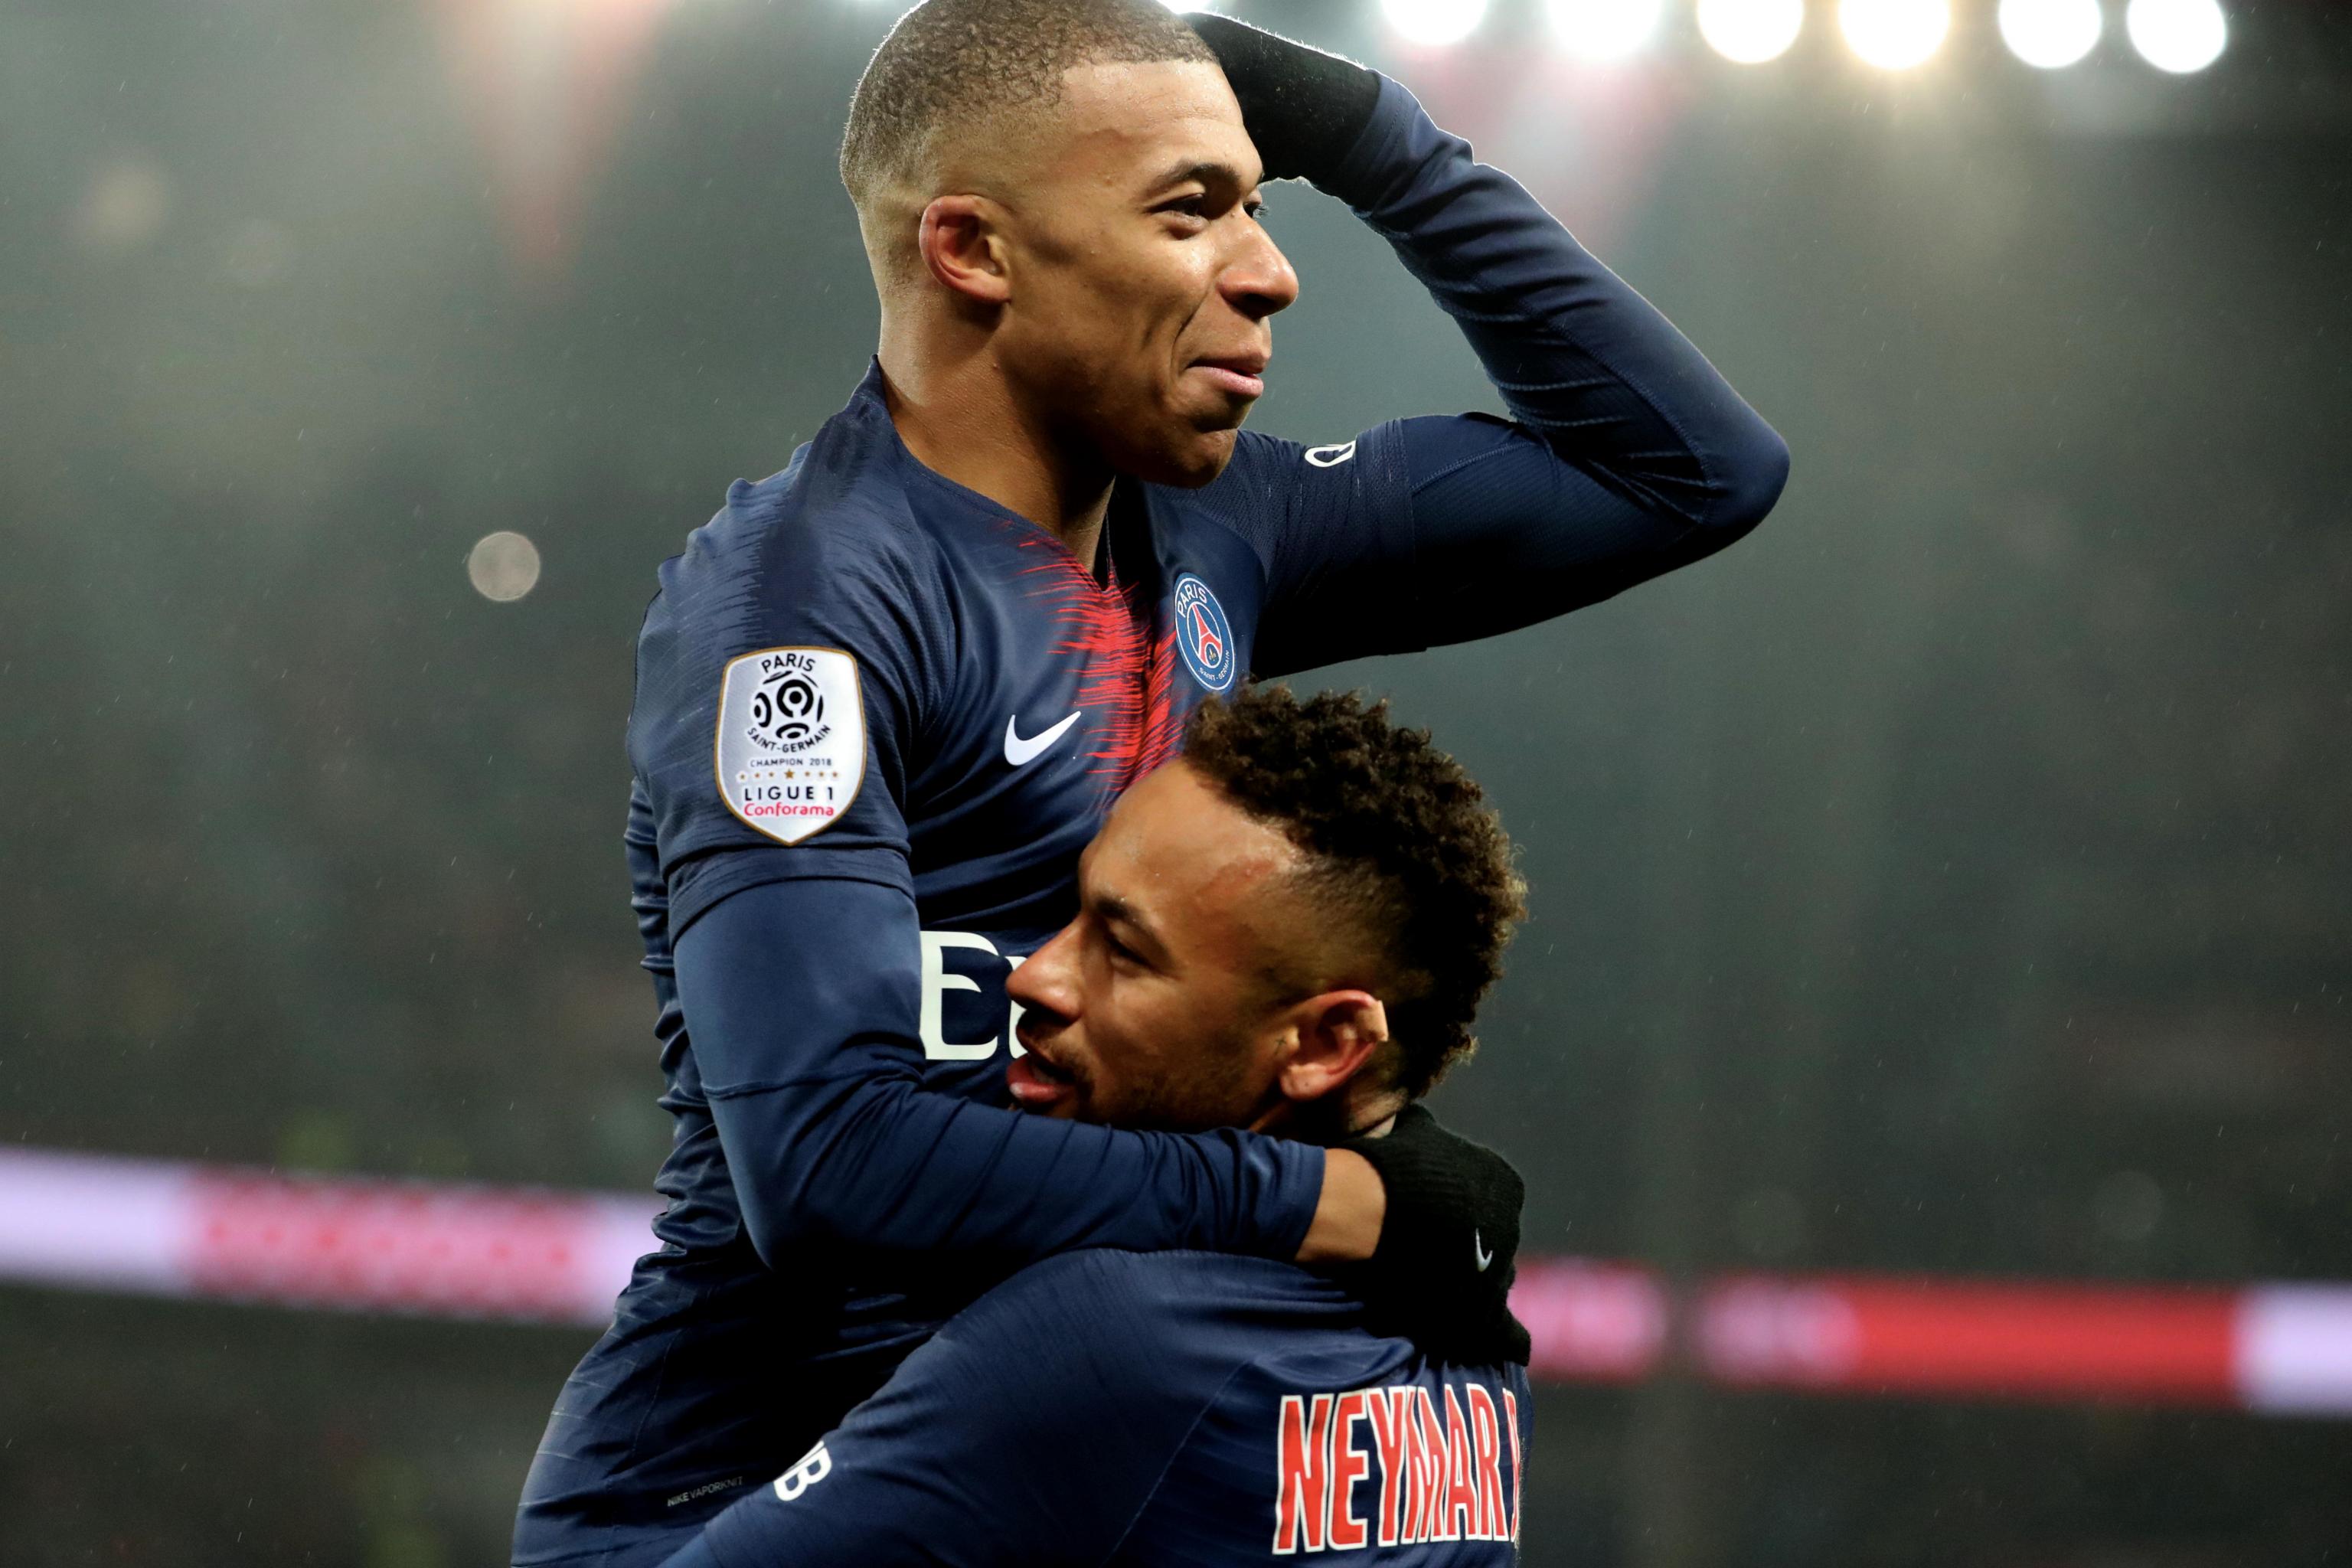 Neymar Compares Relationship With Kylian Mbappe To Lionel Messi Partnership Bleacher Report Latest News Videos And Highlights